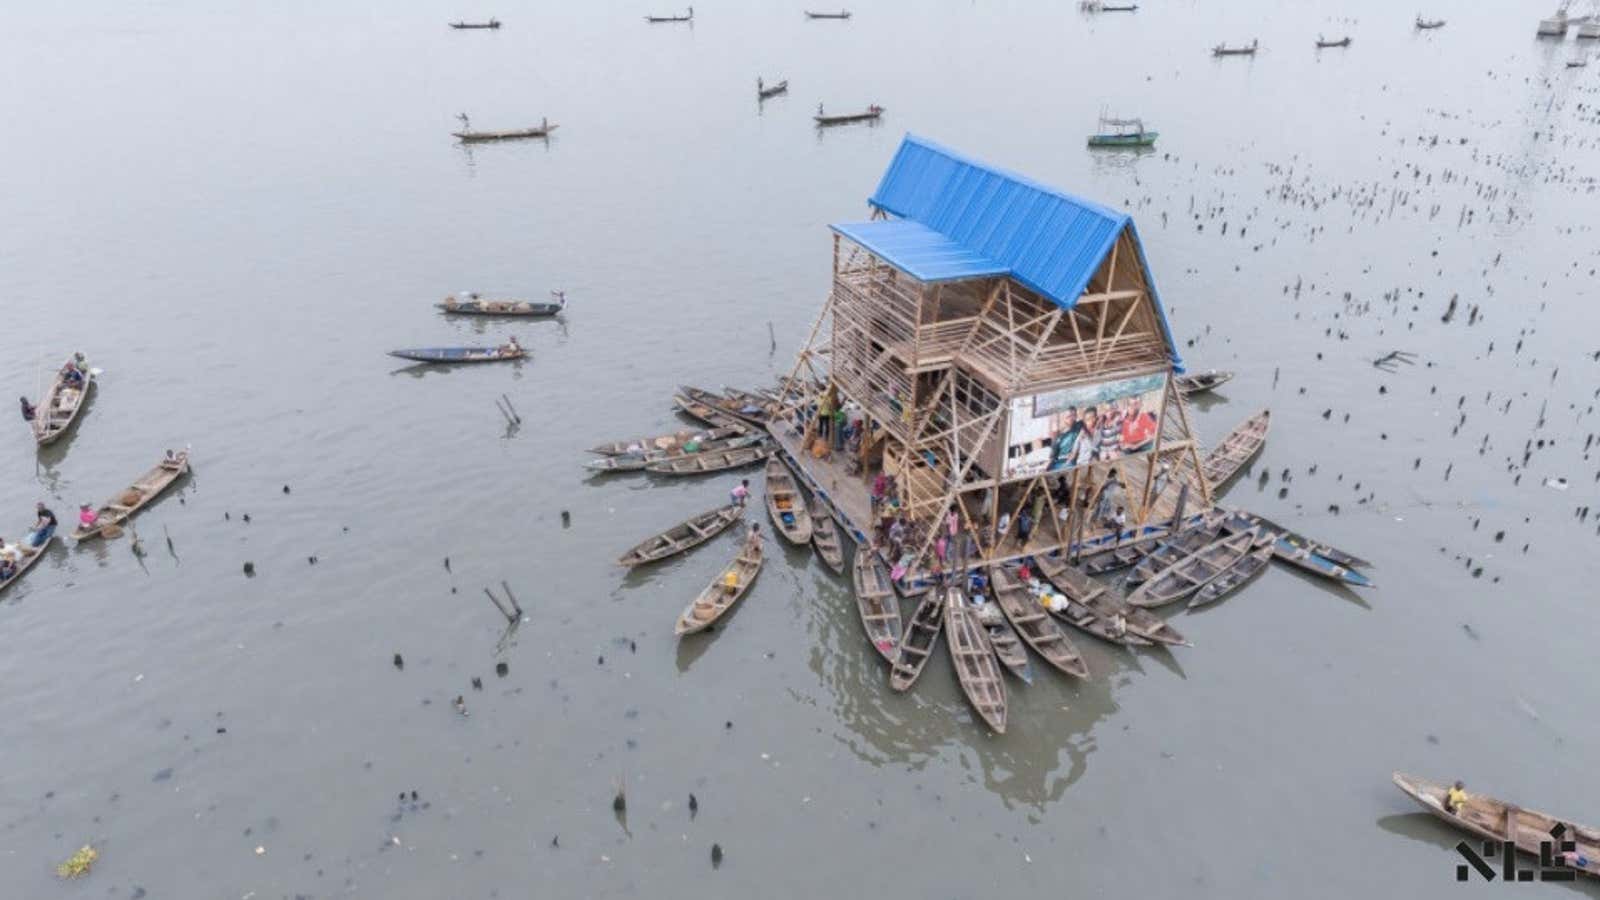 The Makoko Floating School, completed in March 2013.